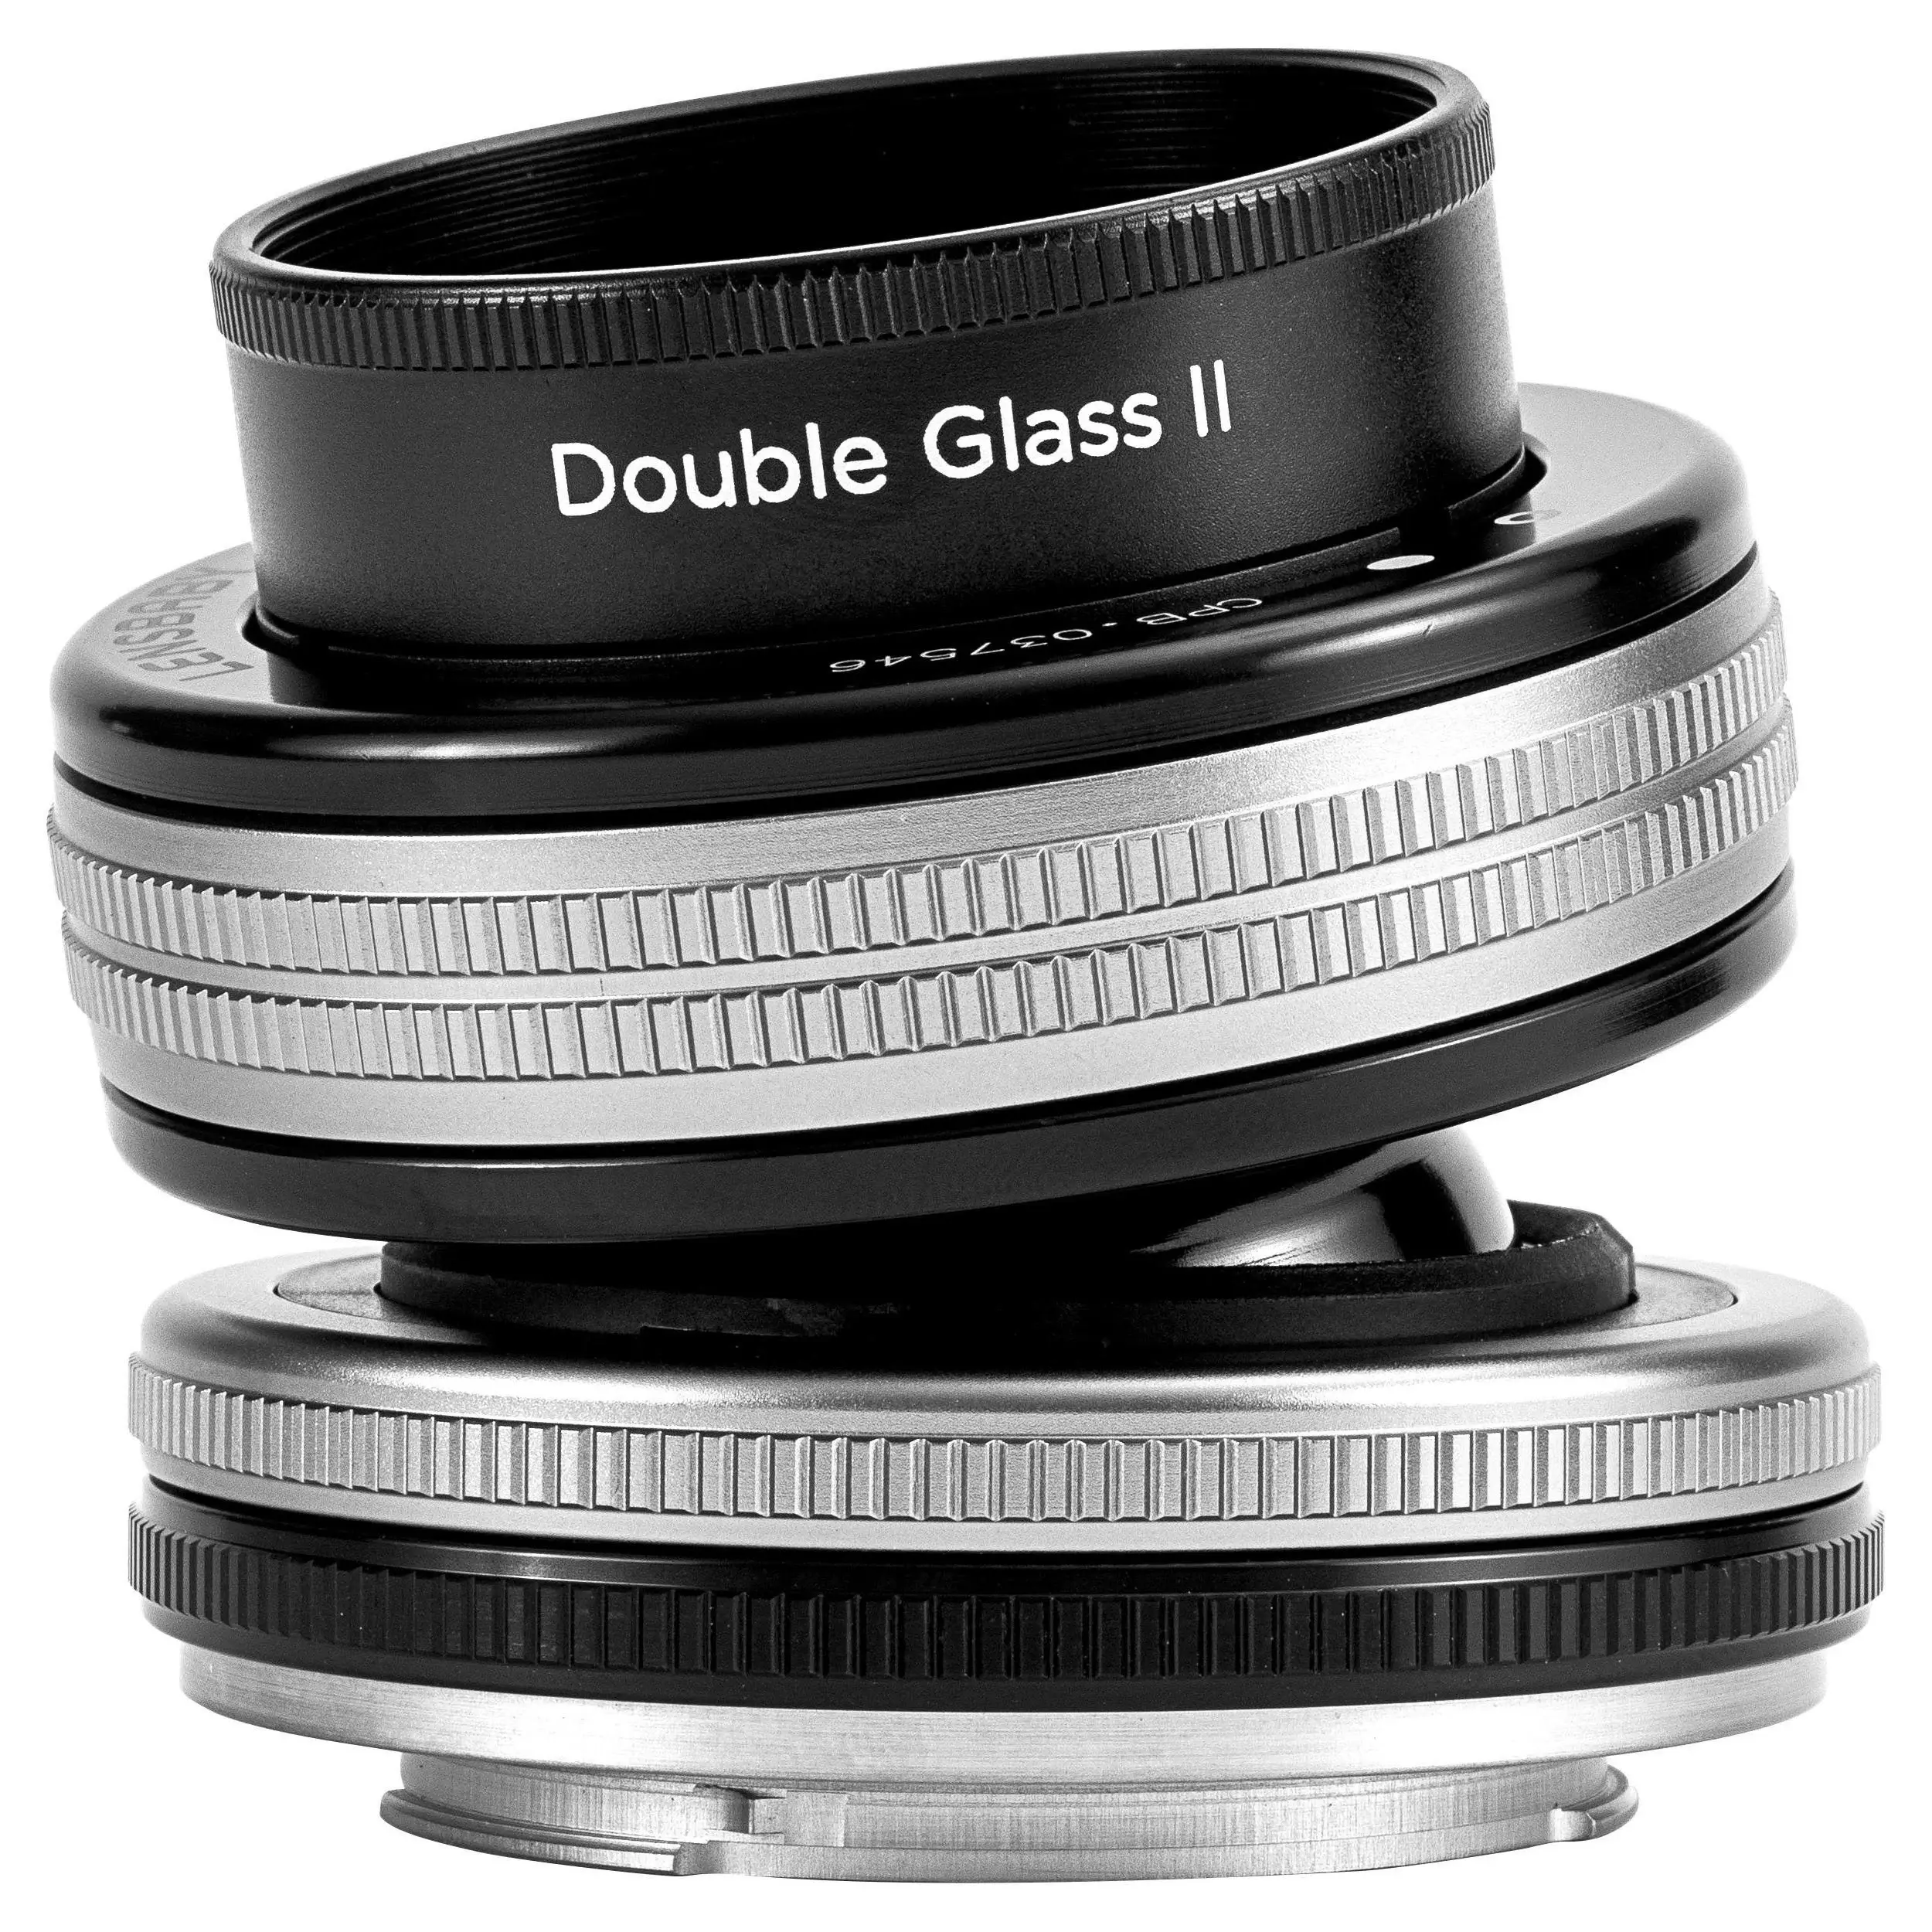 Lensbaby Composer Pro II W/ Double Glass II for Canon EF